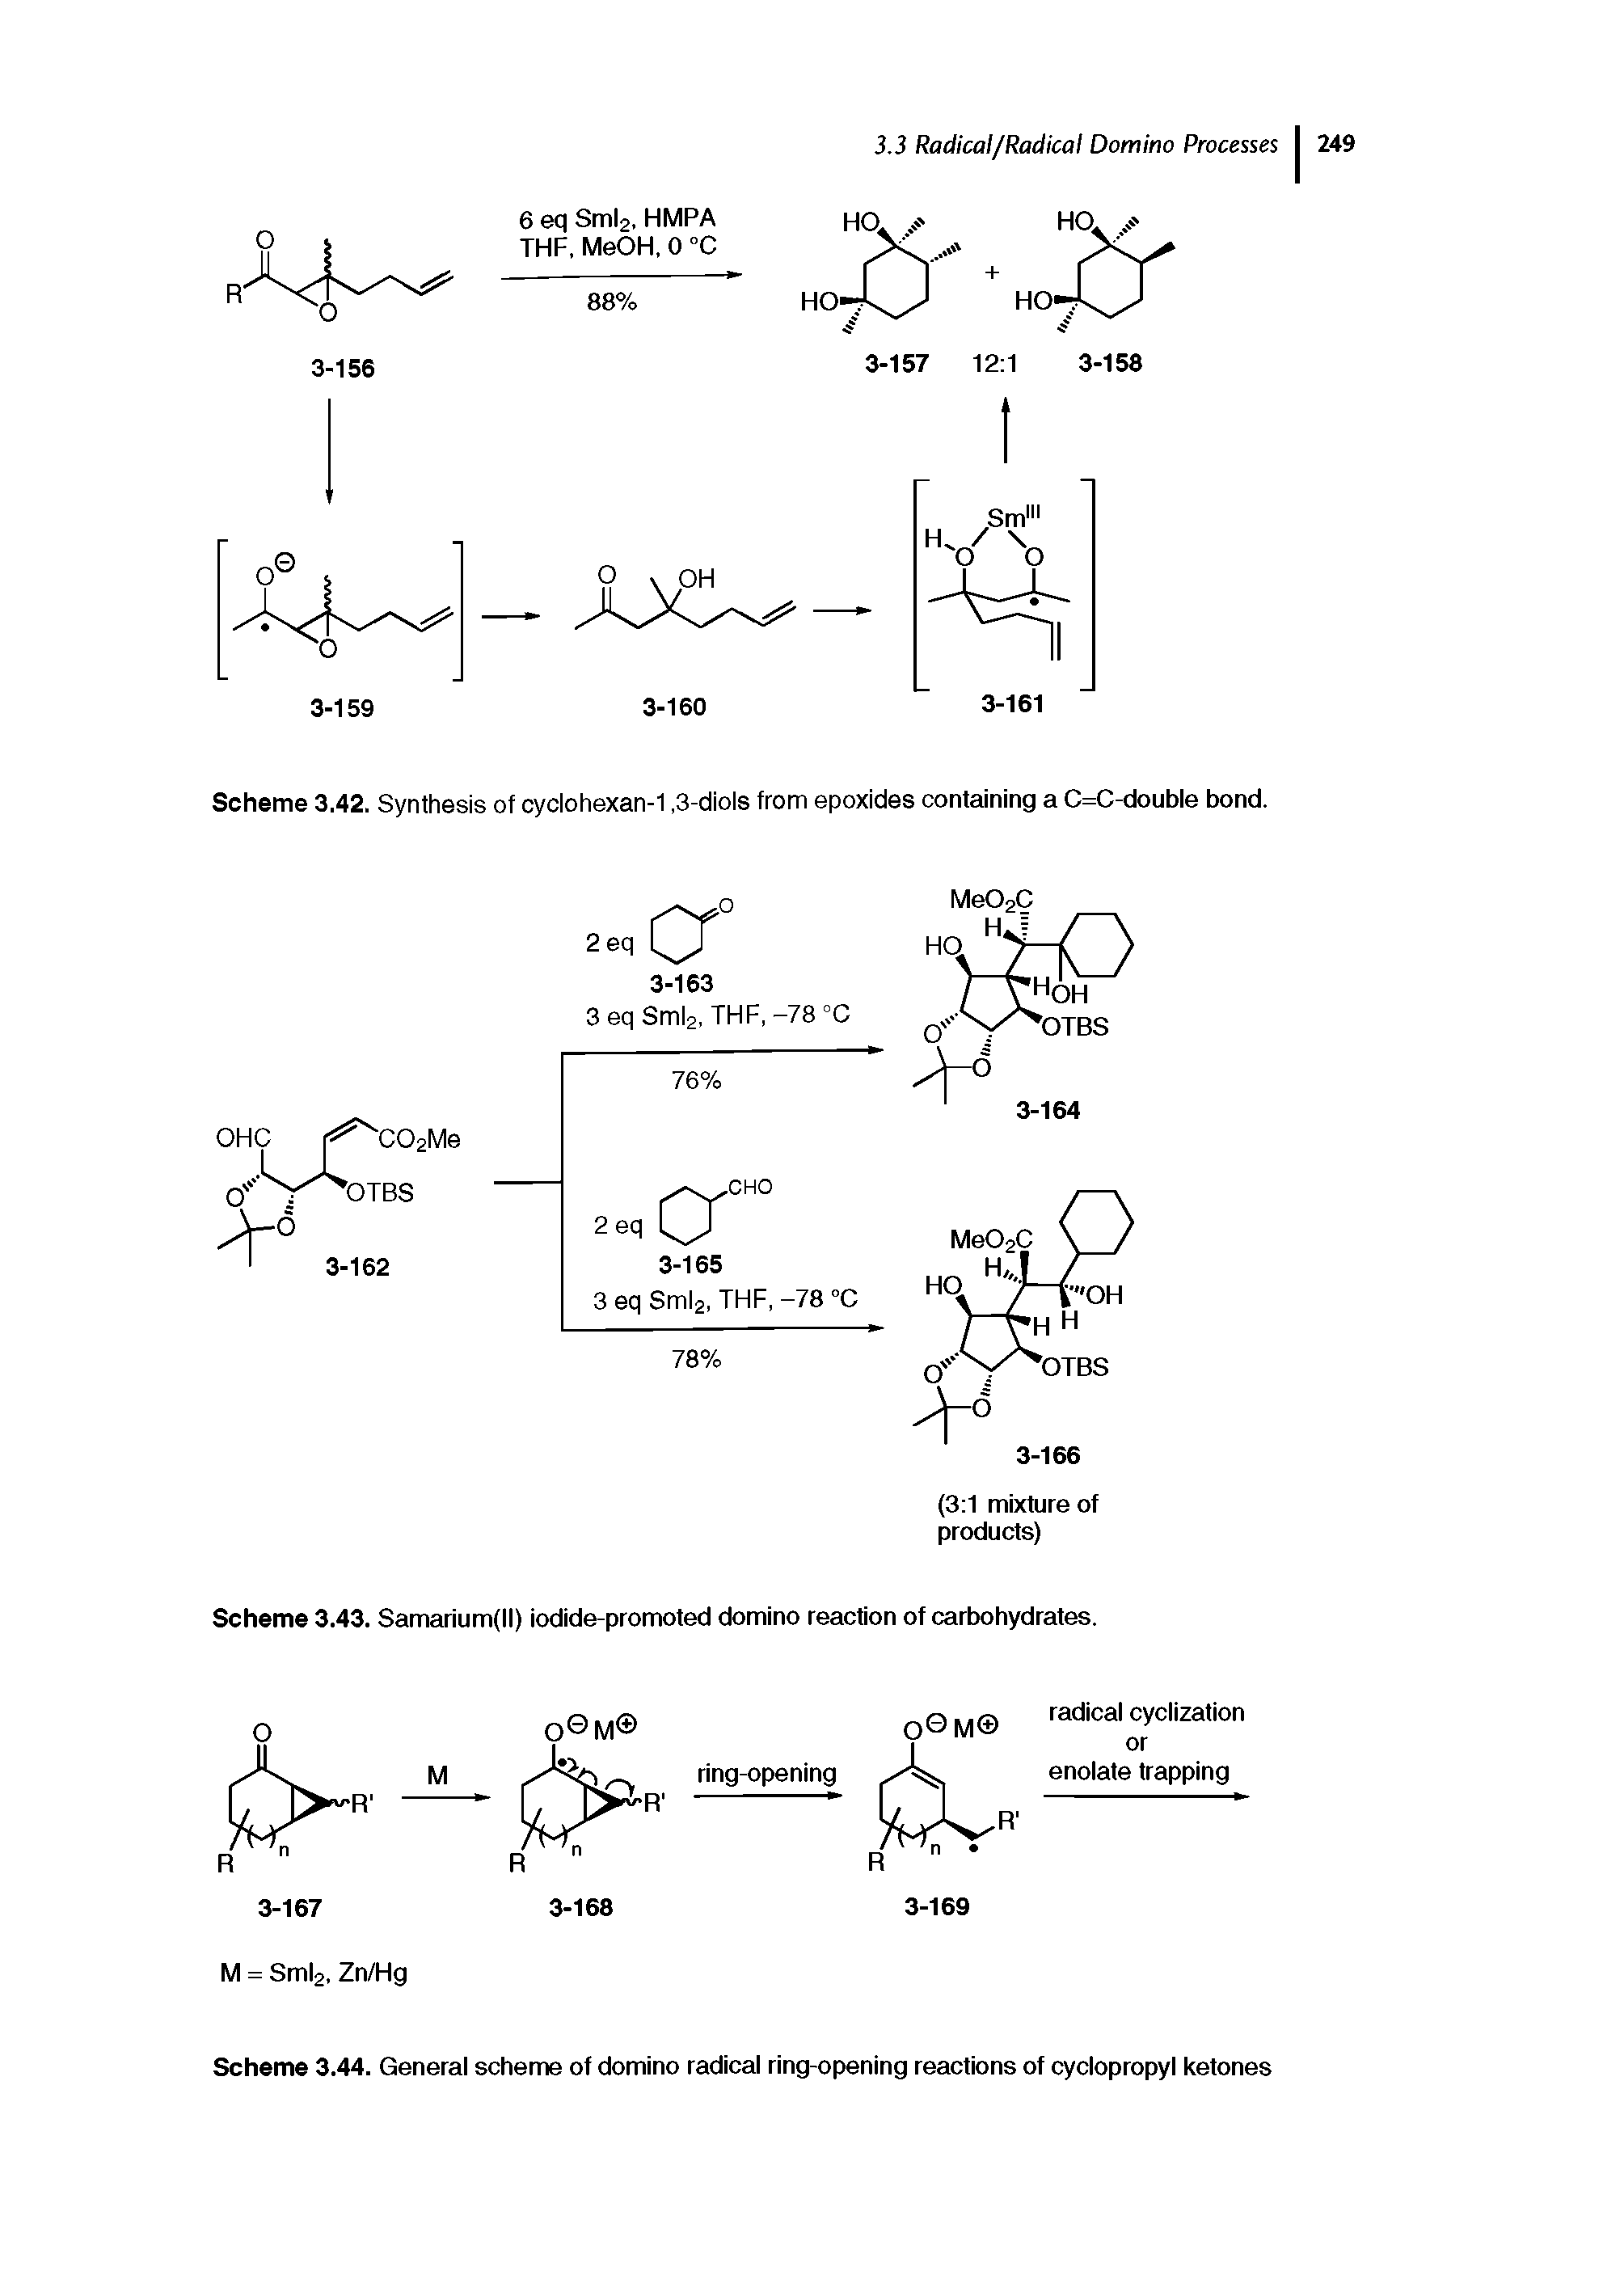 Scheme 3.43. Samarium(ll) iodide-promoted domino reaction of carbohydrates.